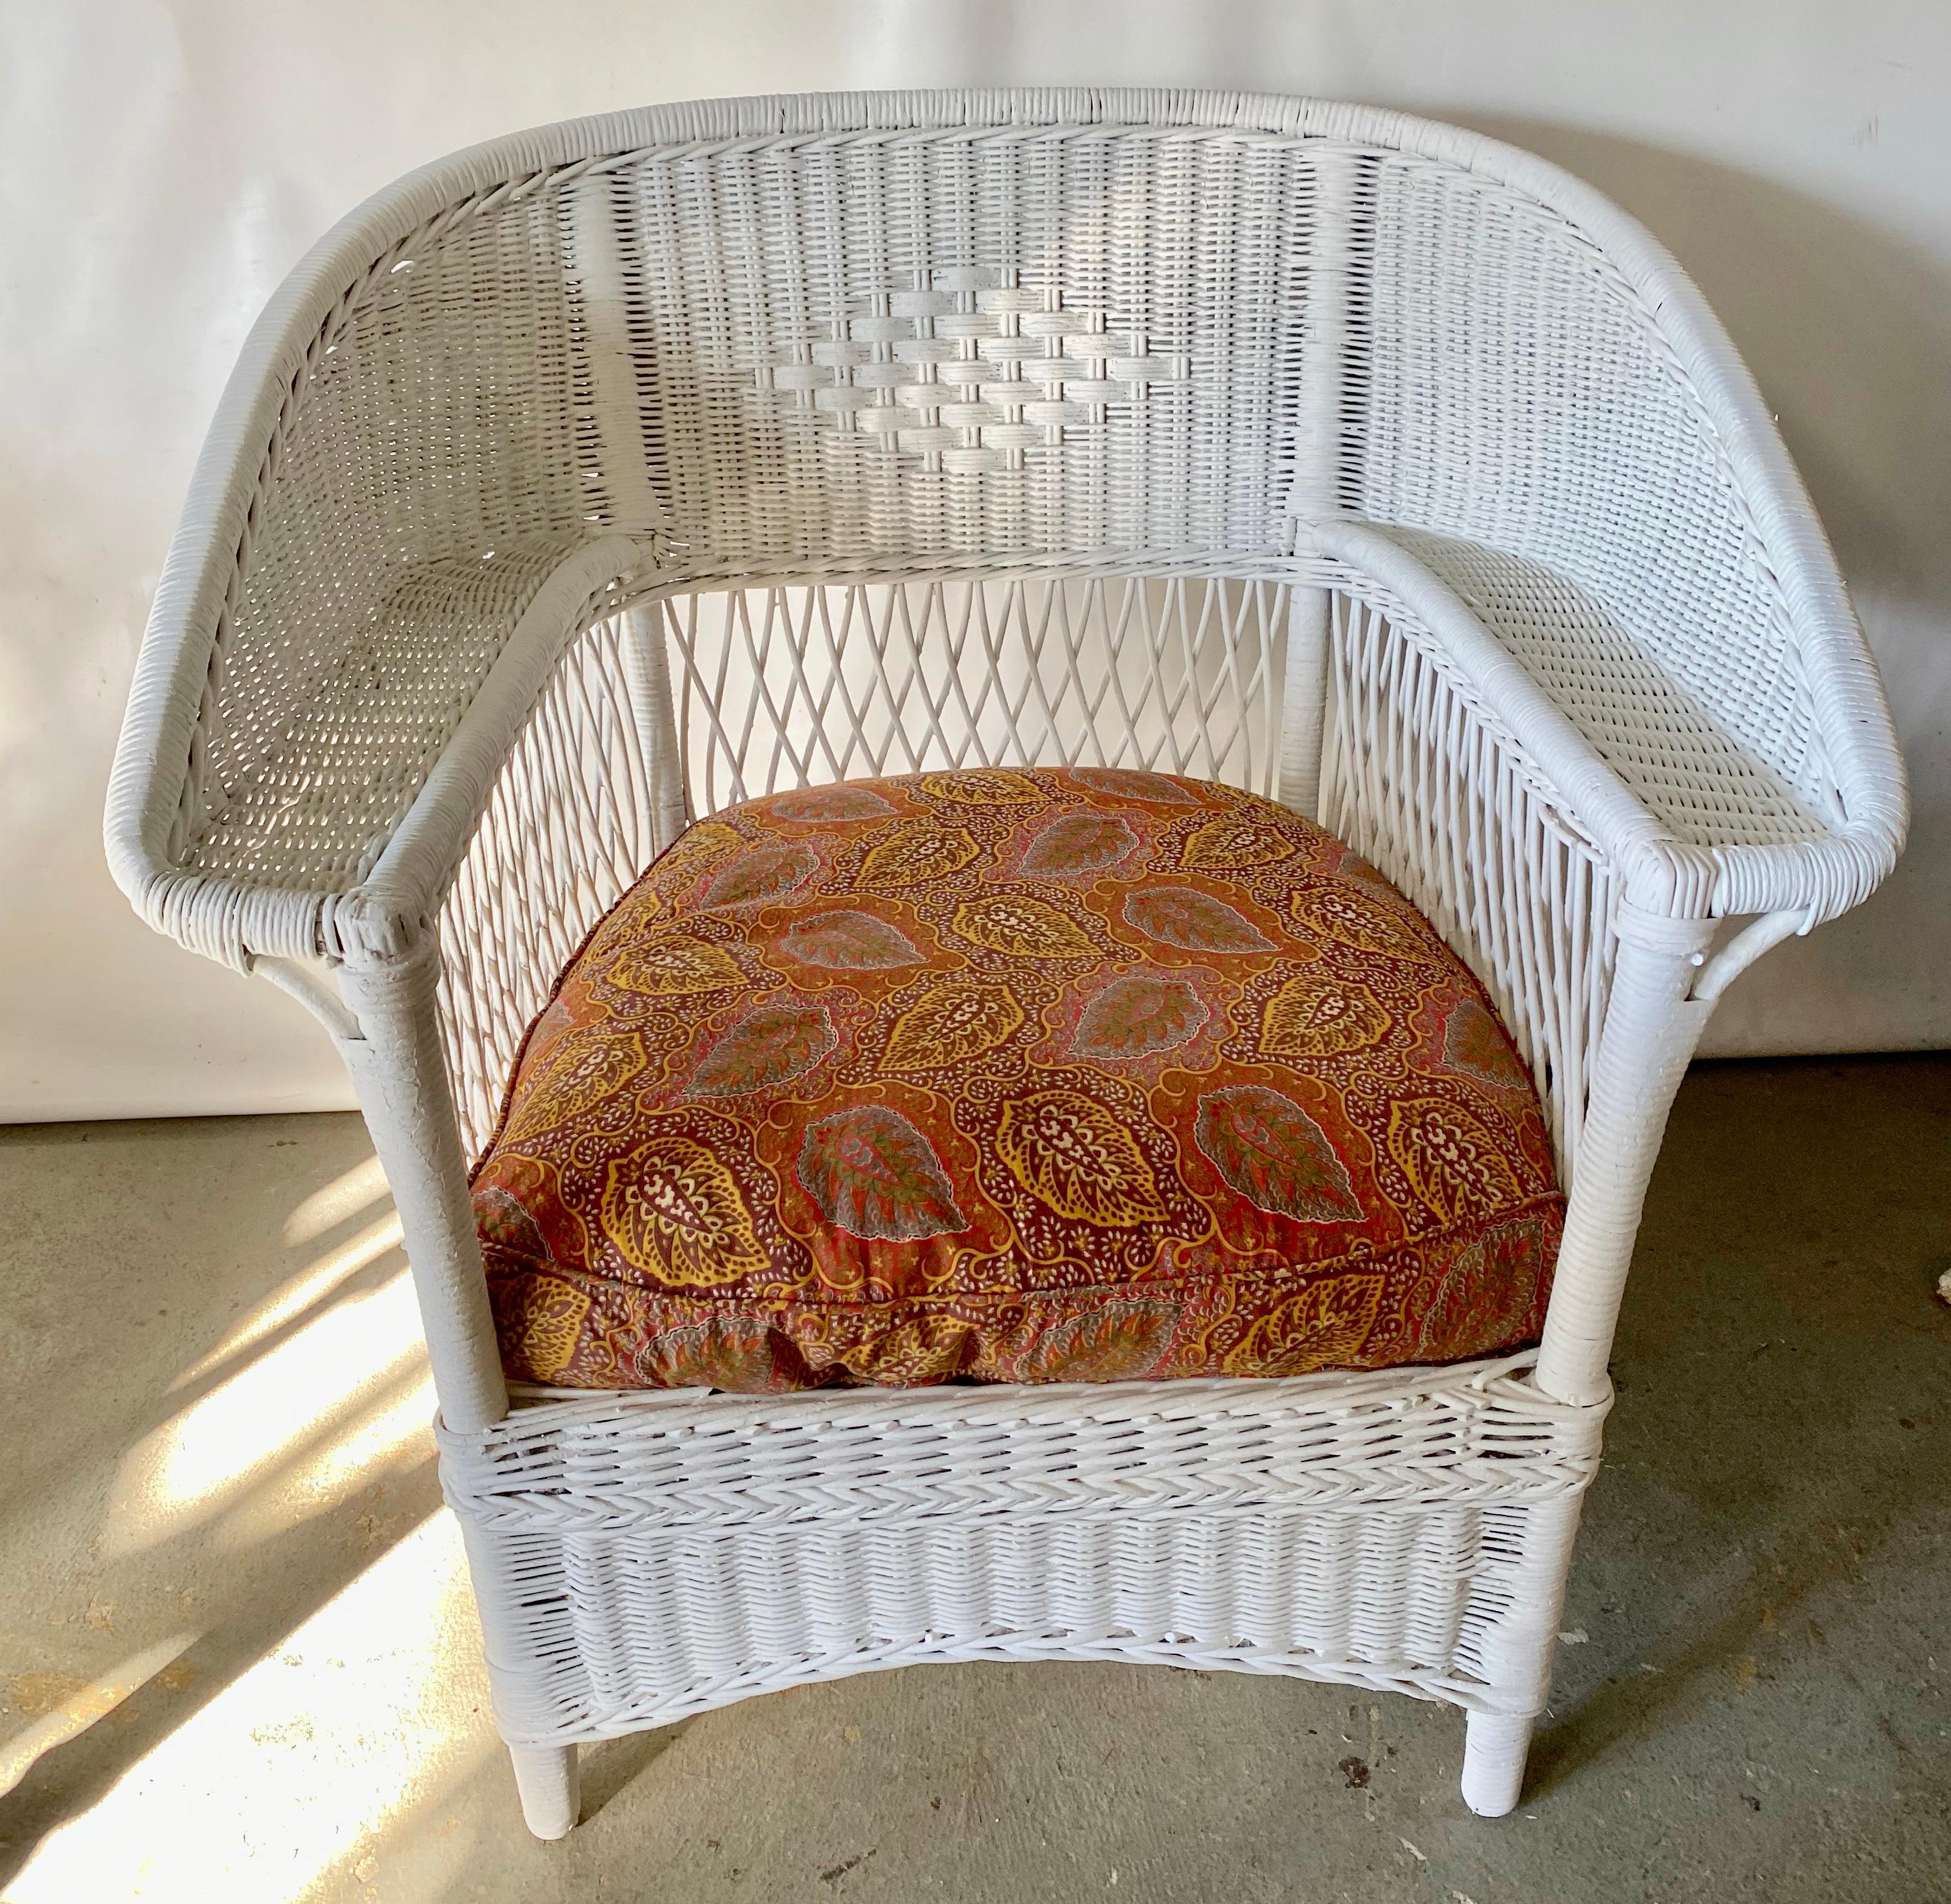 Antique Ficks Reed wicker armchair in fresh white paint has closely woven pattern, open lattice work under the arms. The fan back chair is fully skirted for tailored look on all sides. The Deco period chair has a drop in cushion on to a spring base